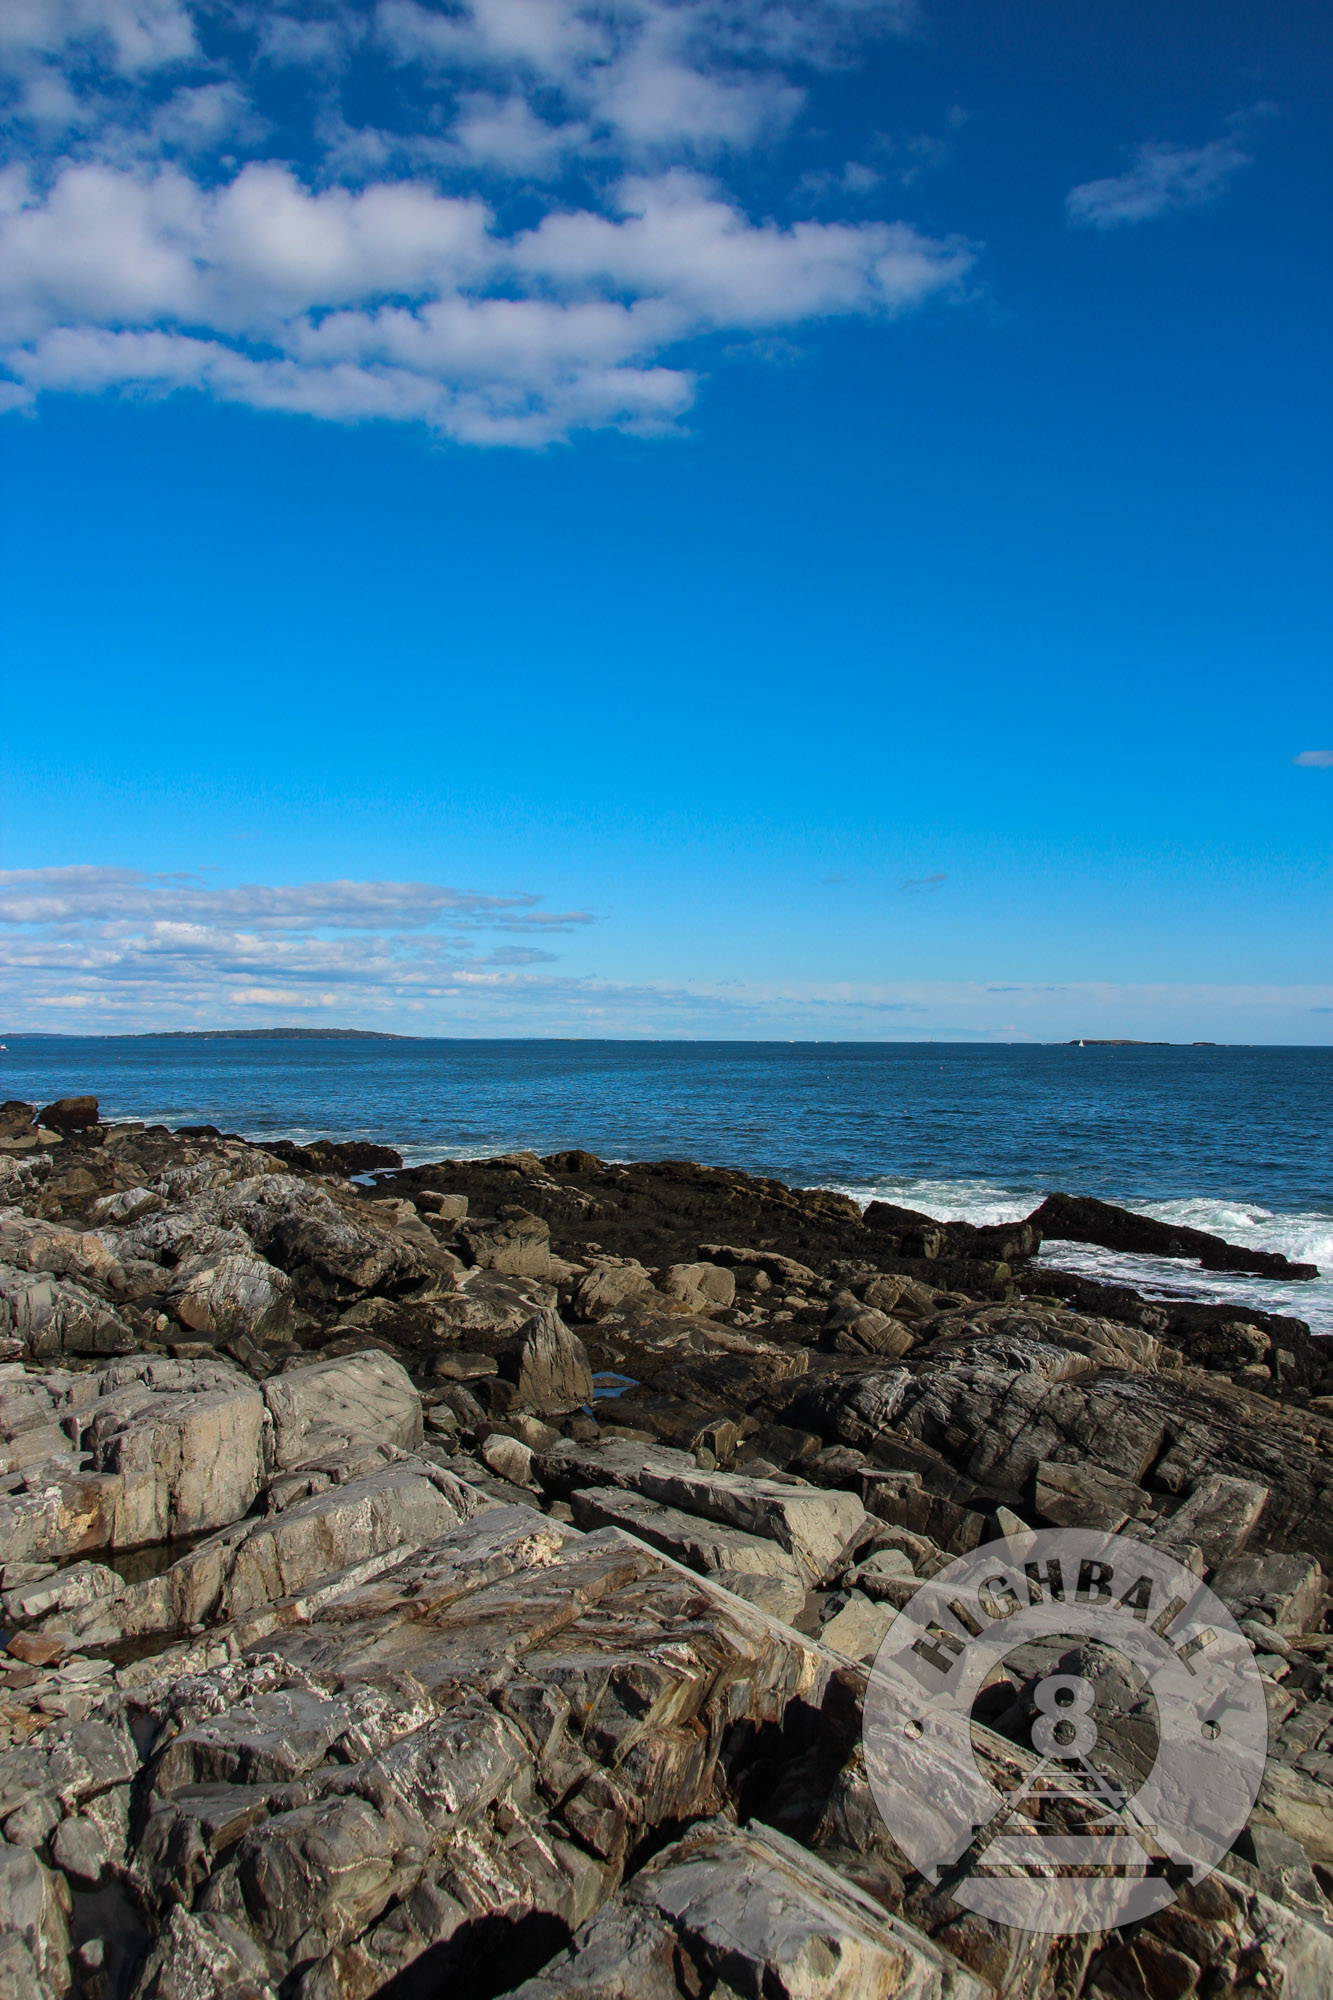 View of Casco Bay and the Atlantic Ocean from Peaks Island, Maine, USA, 2014.